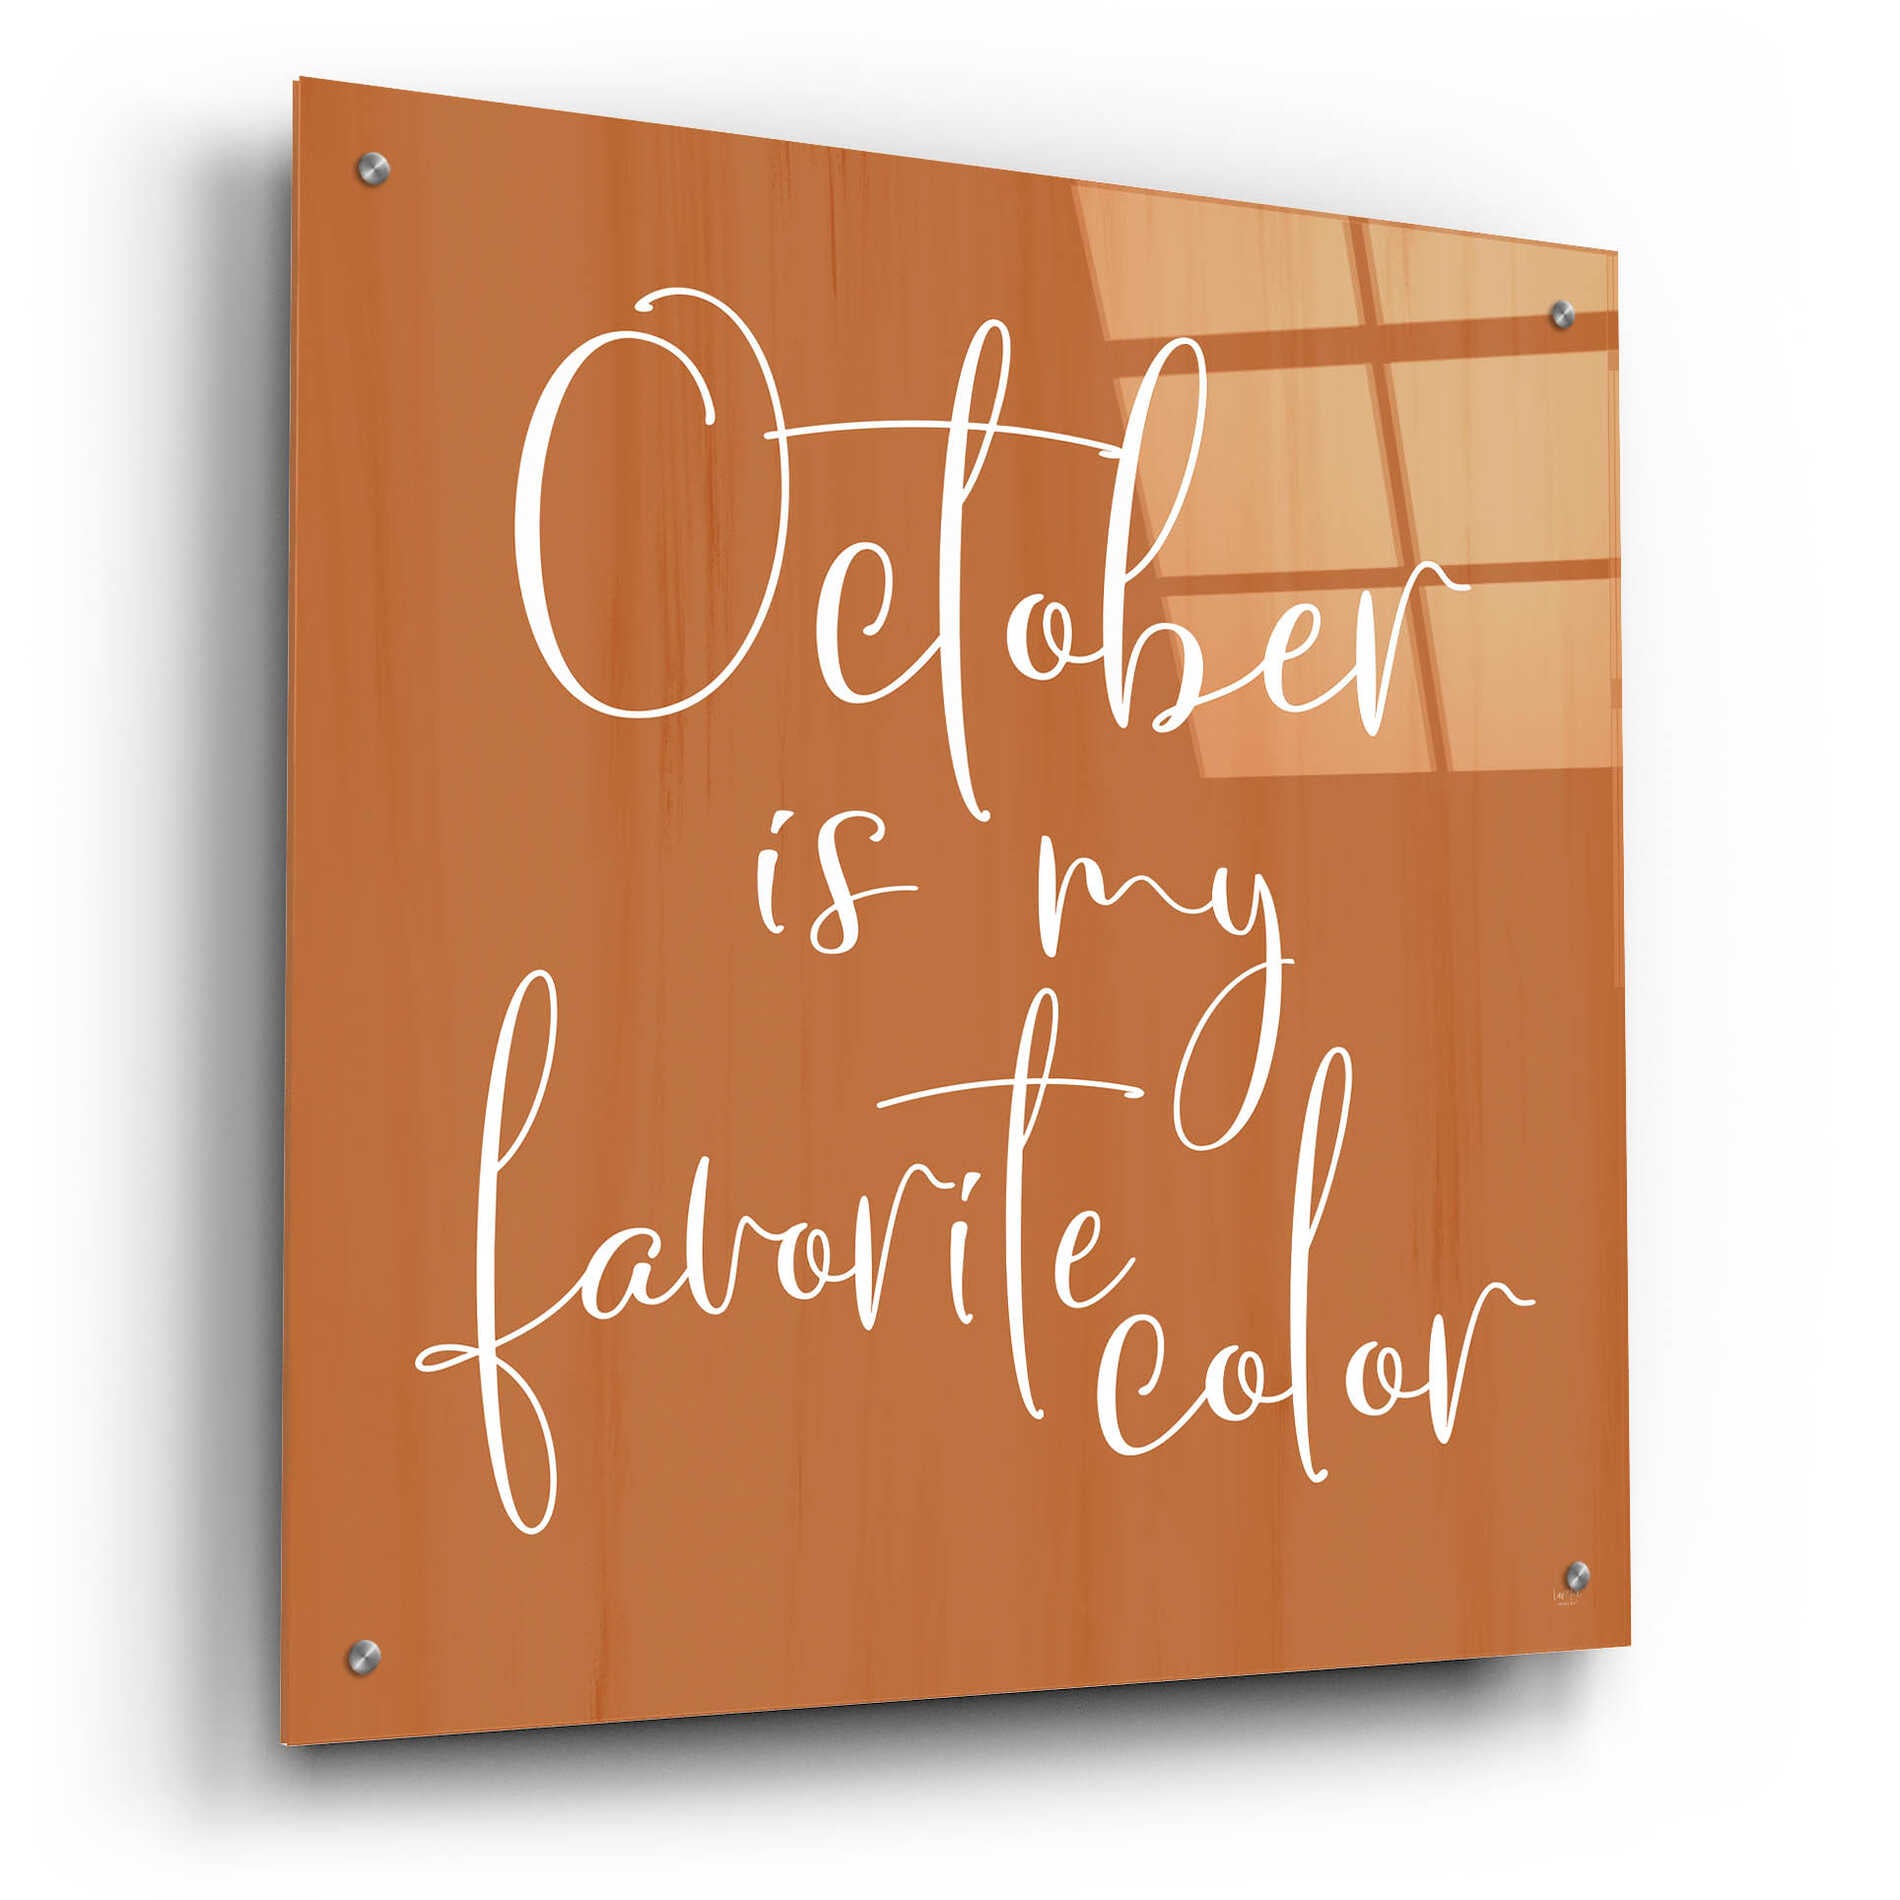 Epic Art 'October is My Favorite Color' by Lux + Me Designs, Acrylic Glass Wall Art,24x24